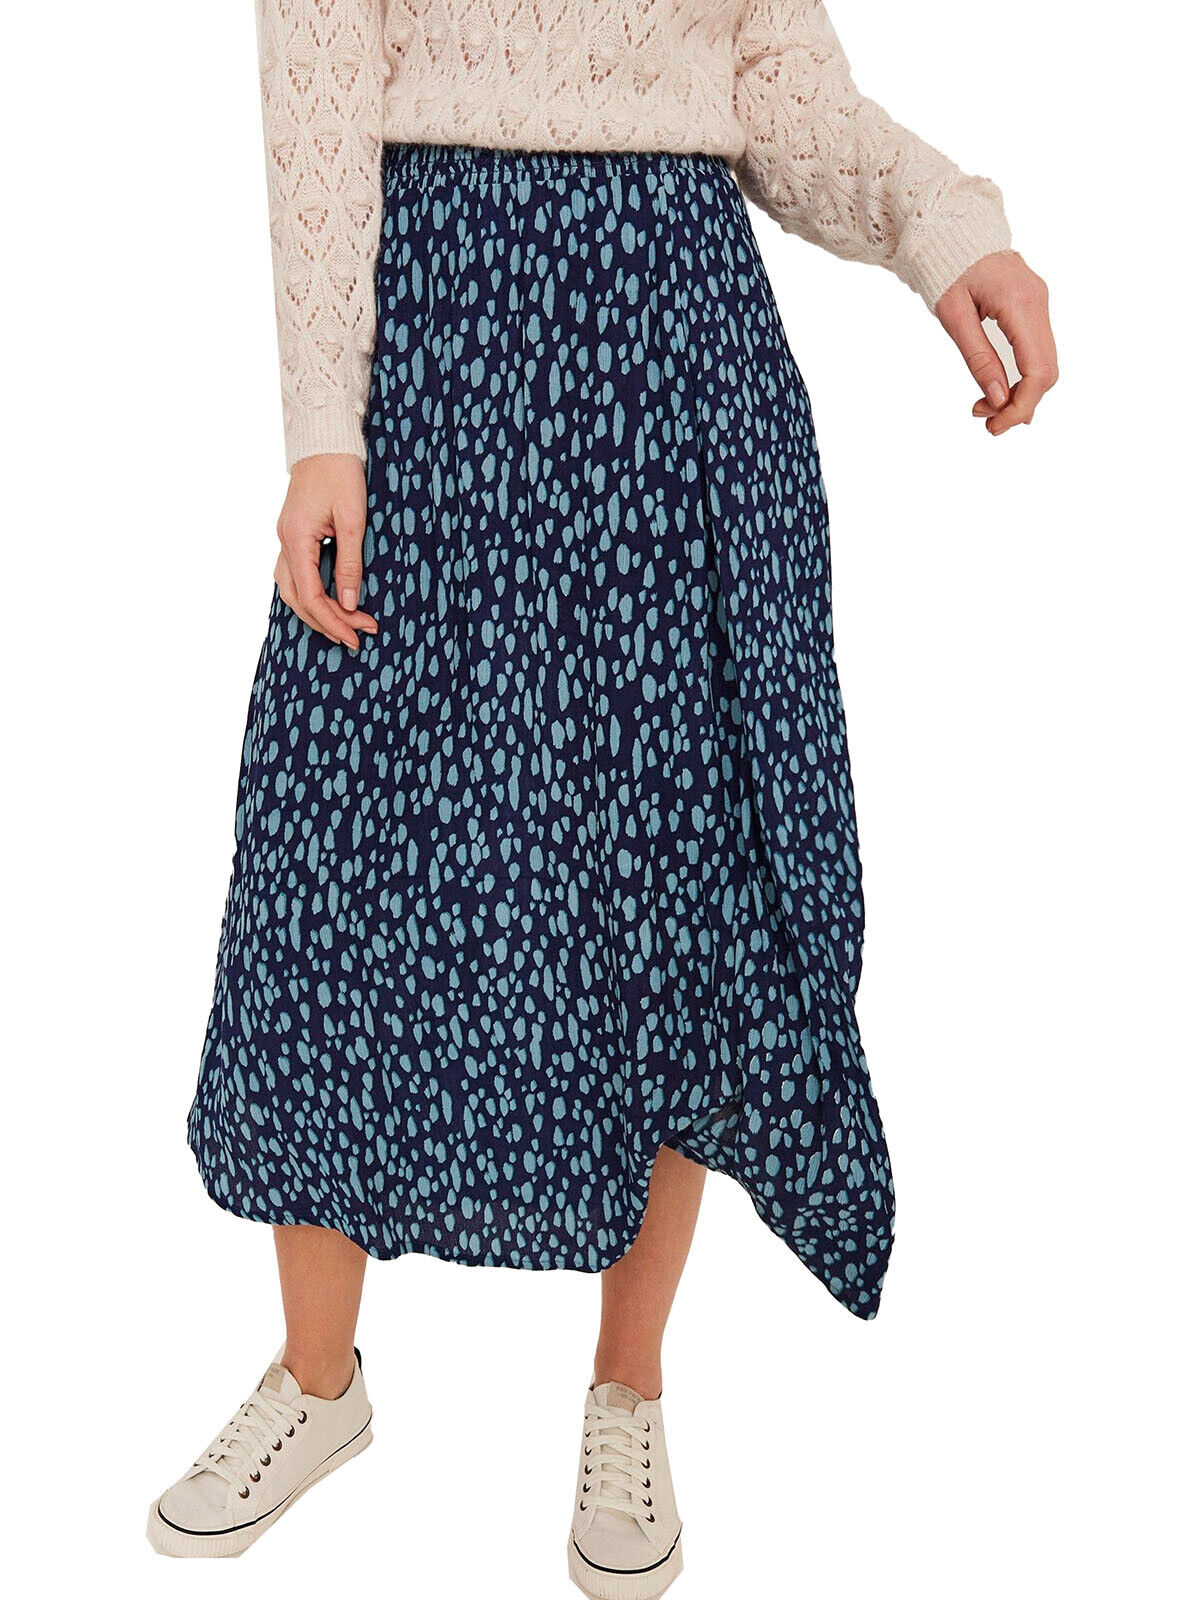 EX Fat Face Blue Printed Jersey Maxi Skirt in Size 16